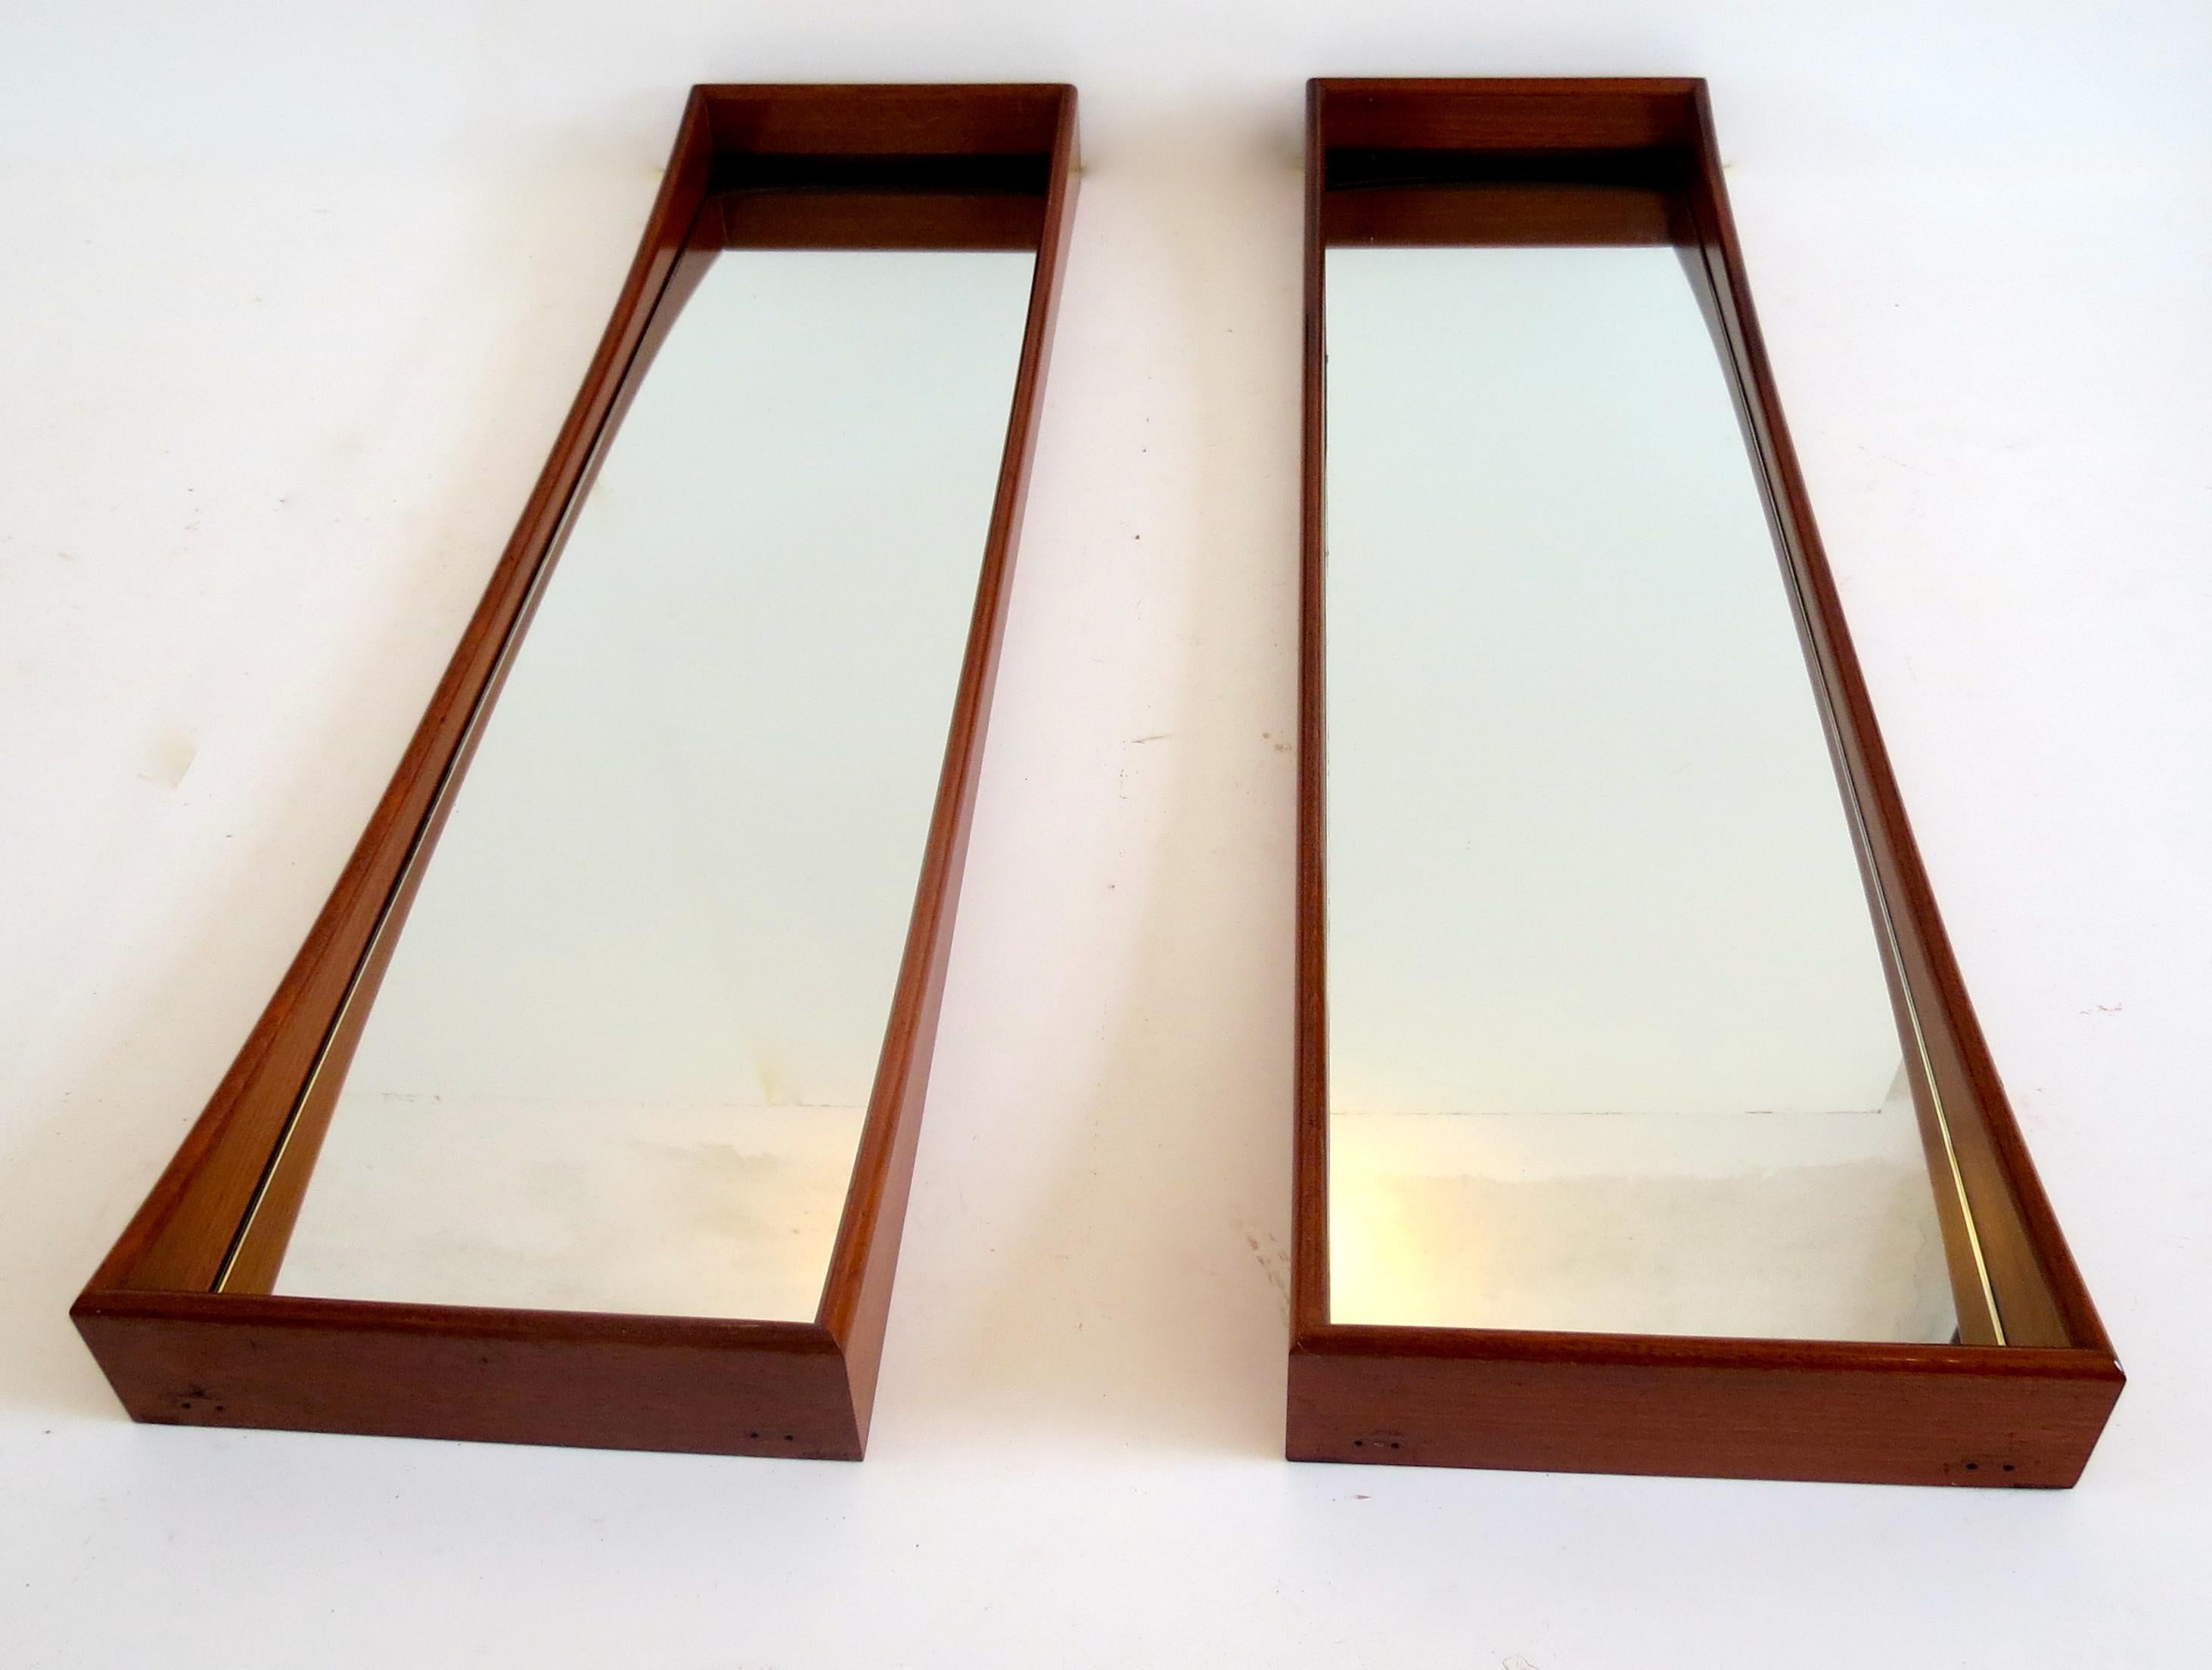 Pair of big wall mirror in the style of Ico Parisi, circa 1950
walnut mirror bronze
Measures: 40x 150 x 10 cm.
  